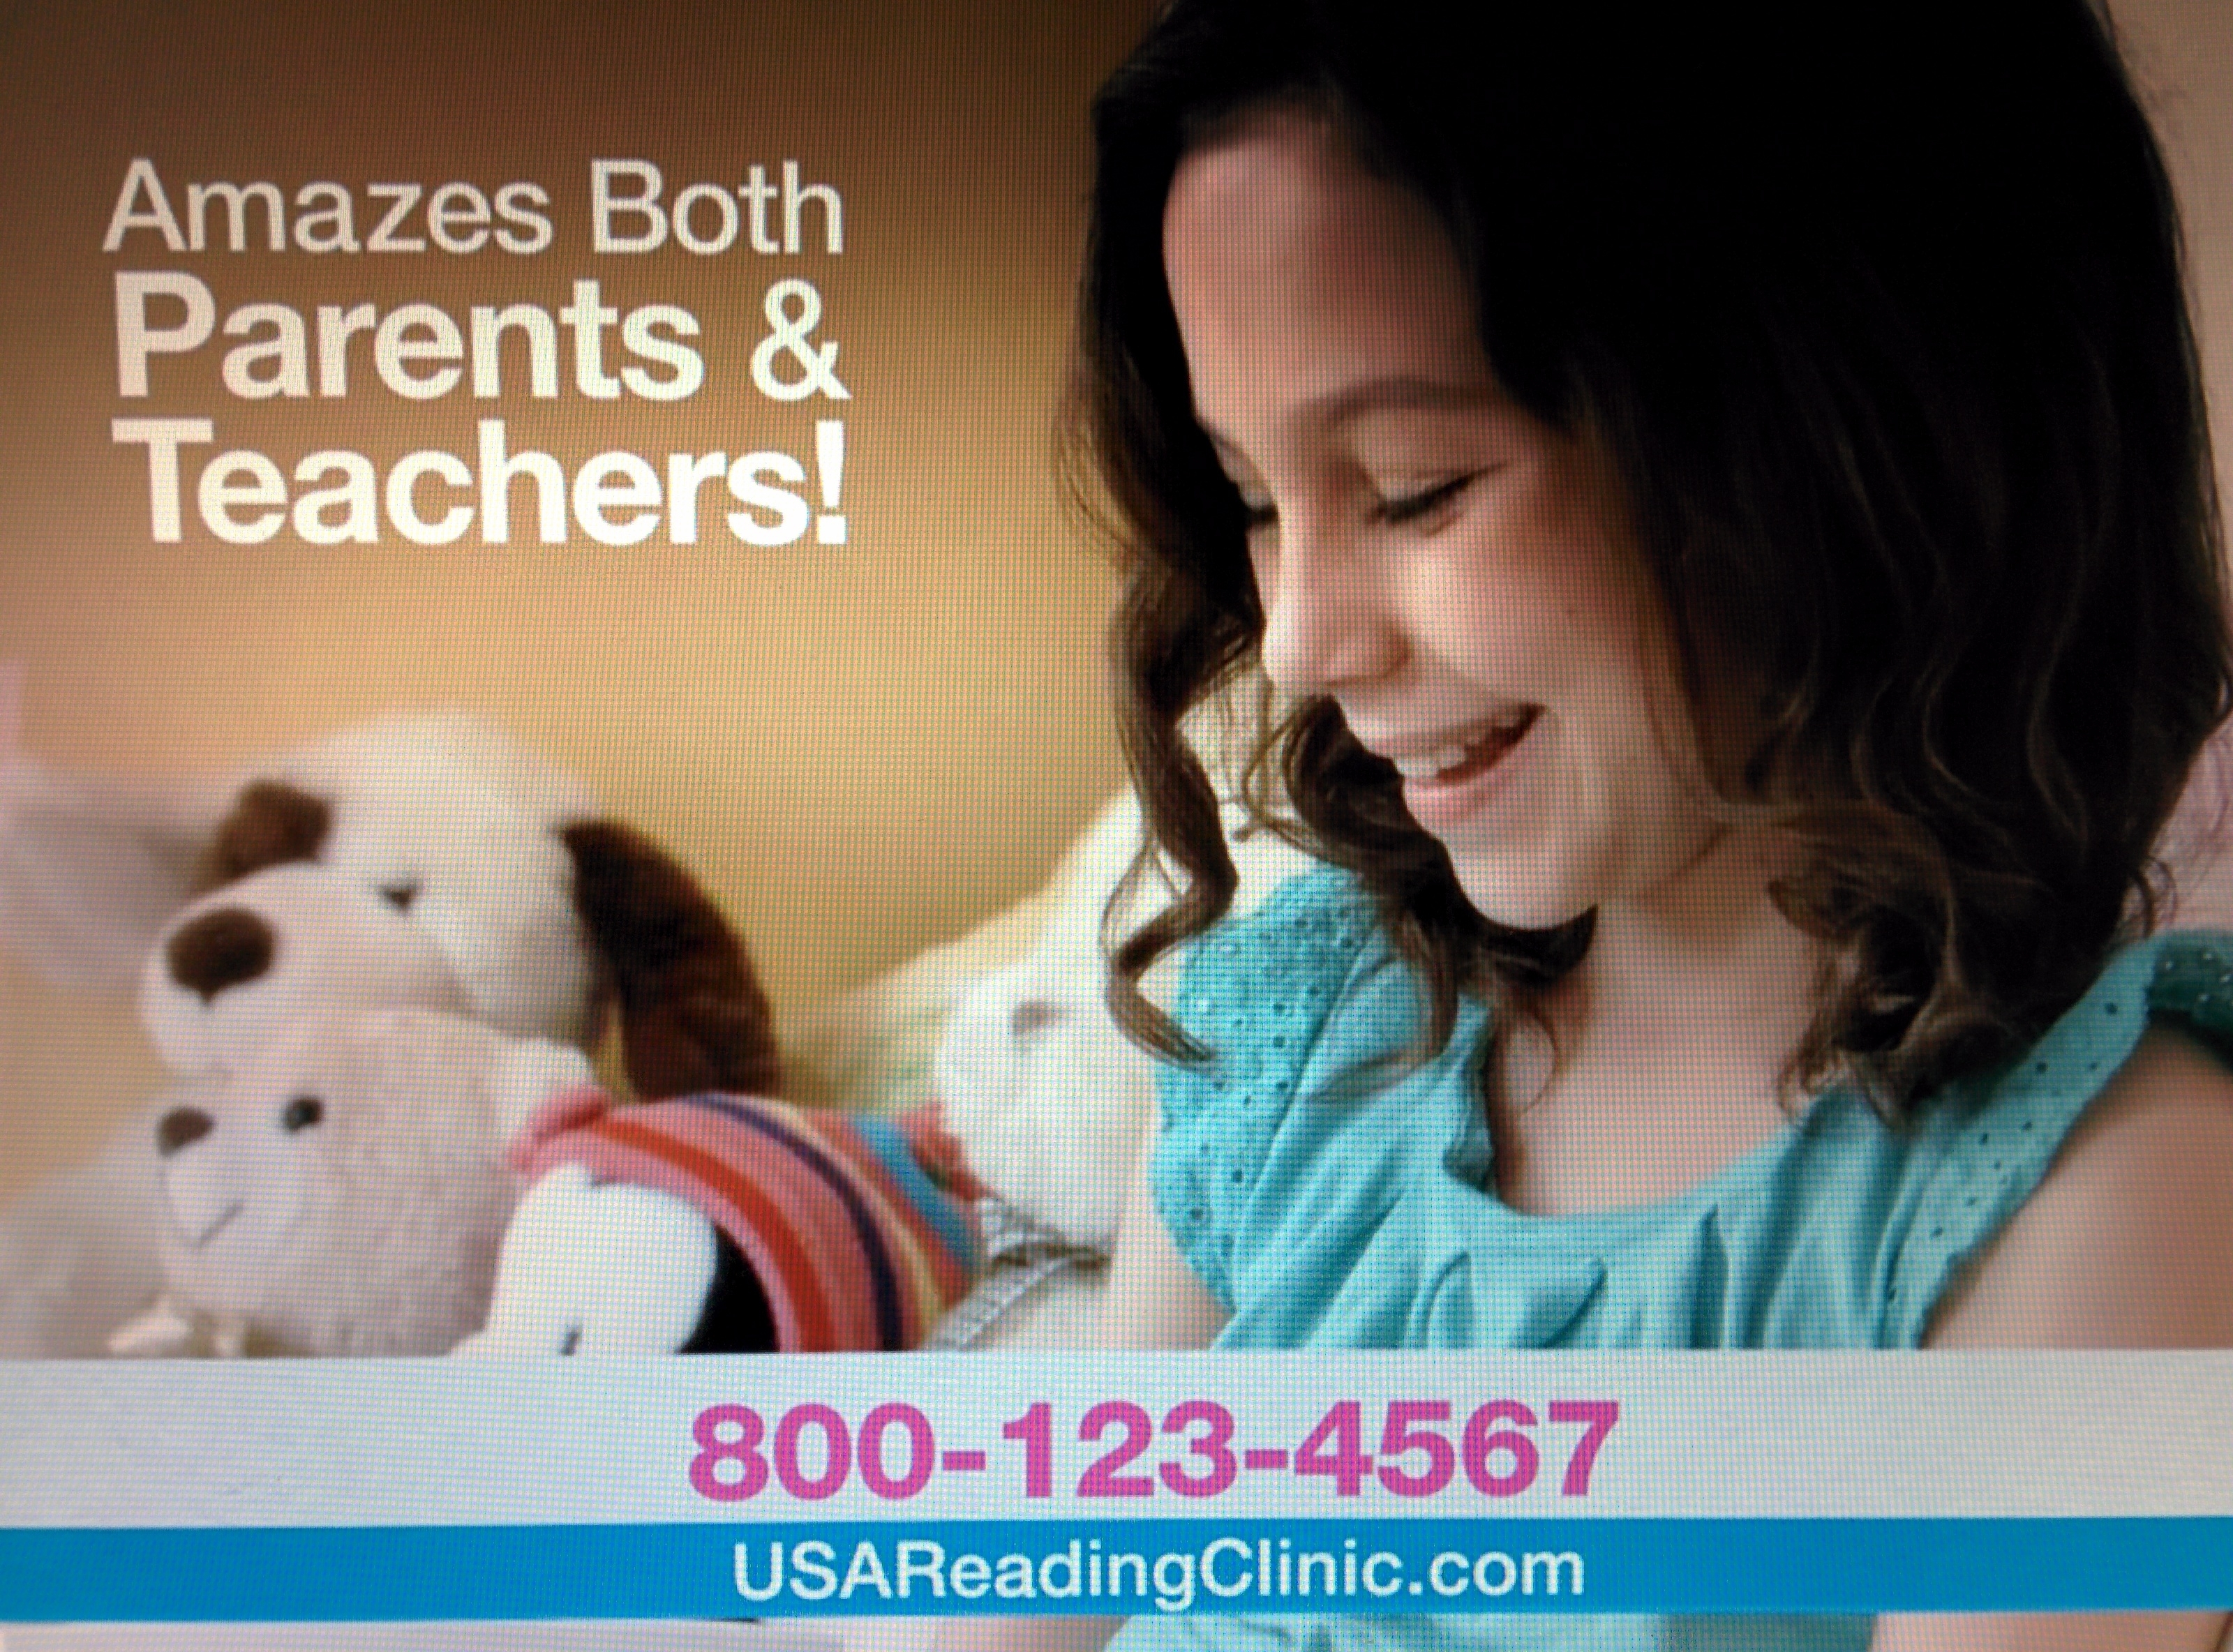 USA Reading Clinic commercial